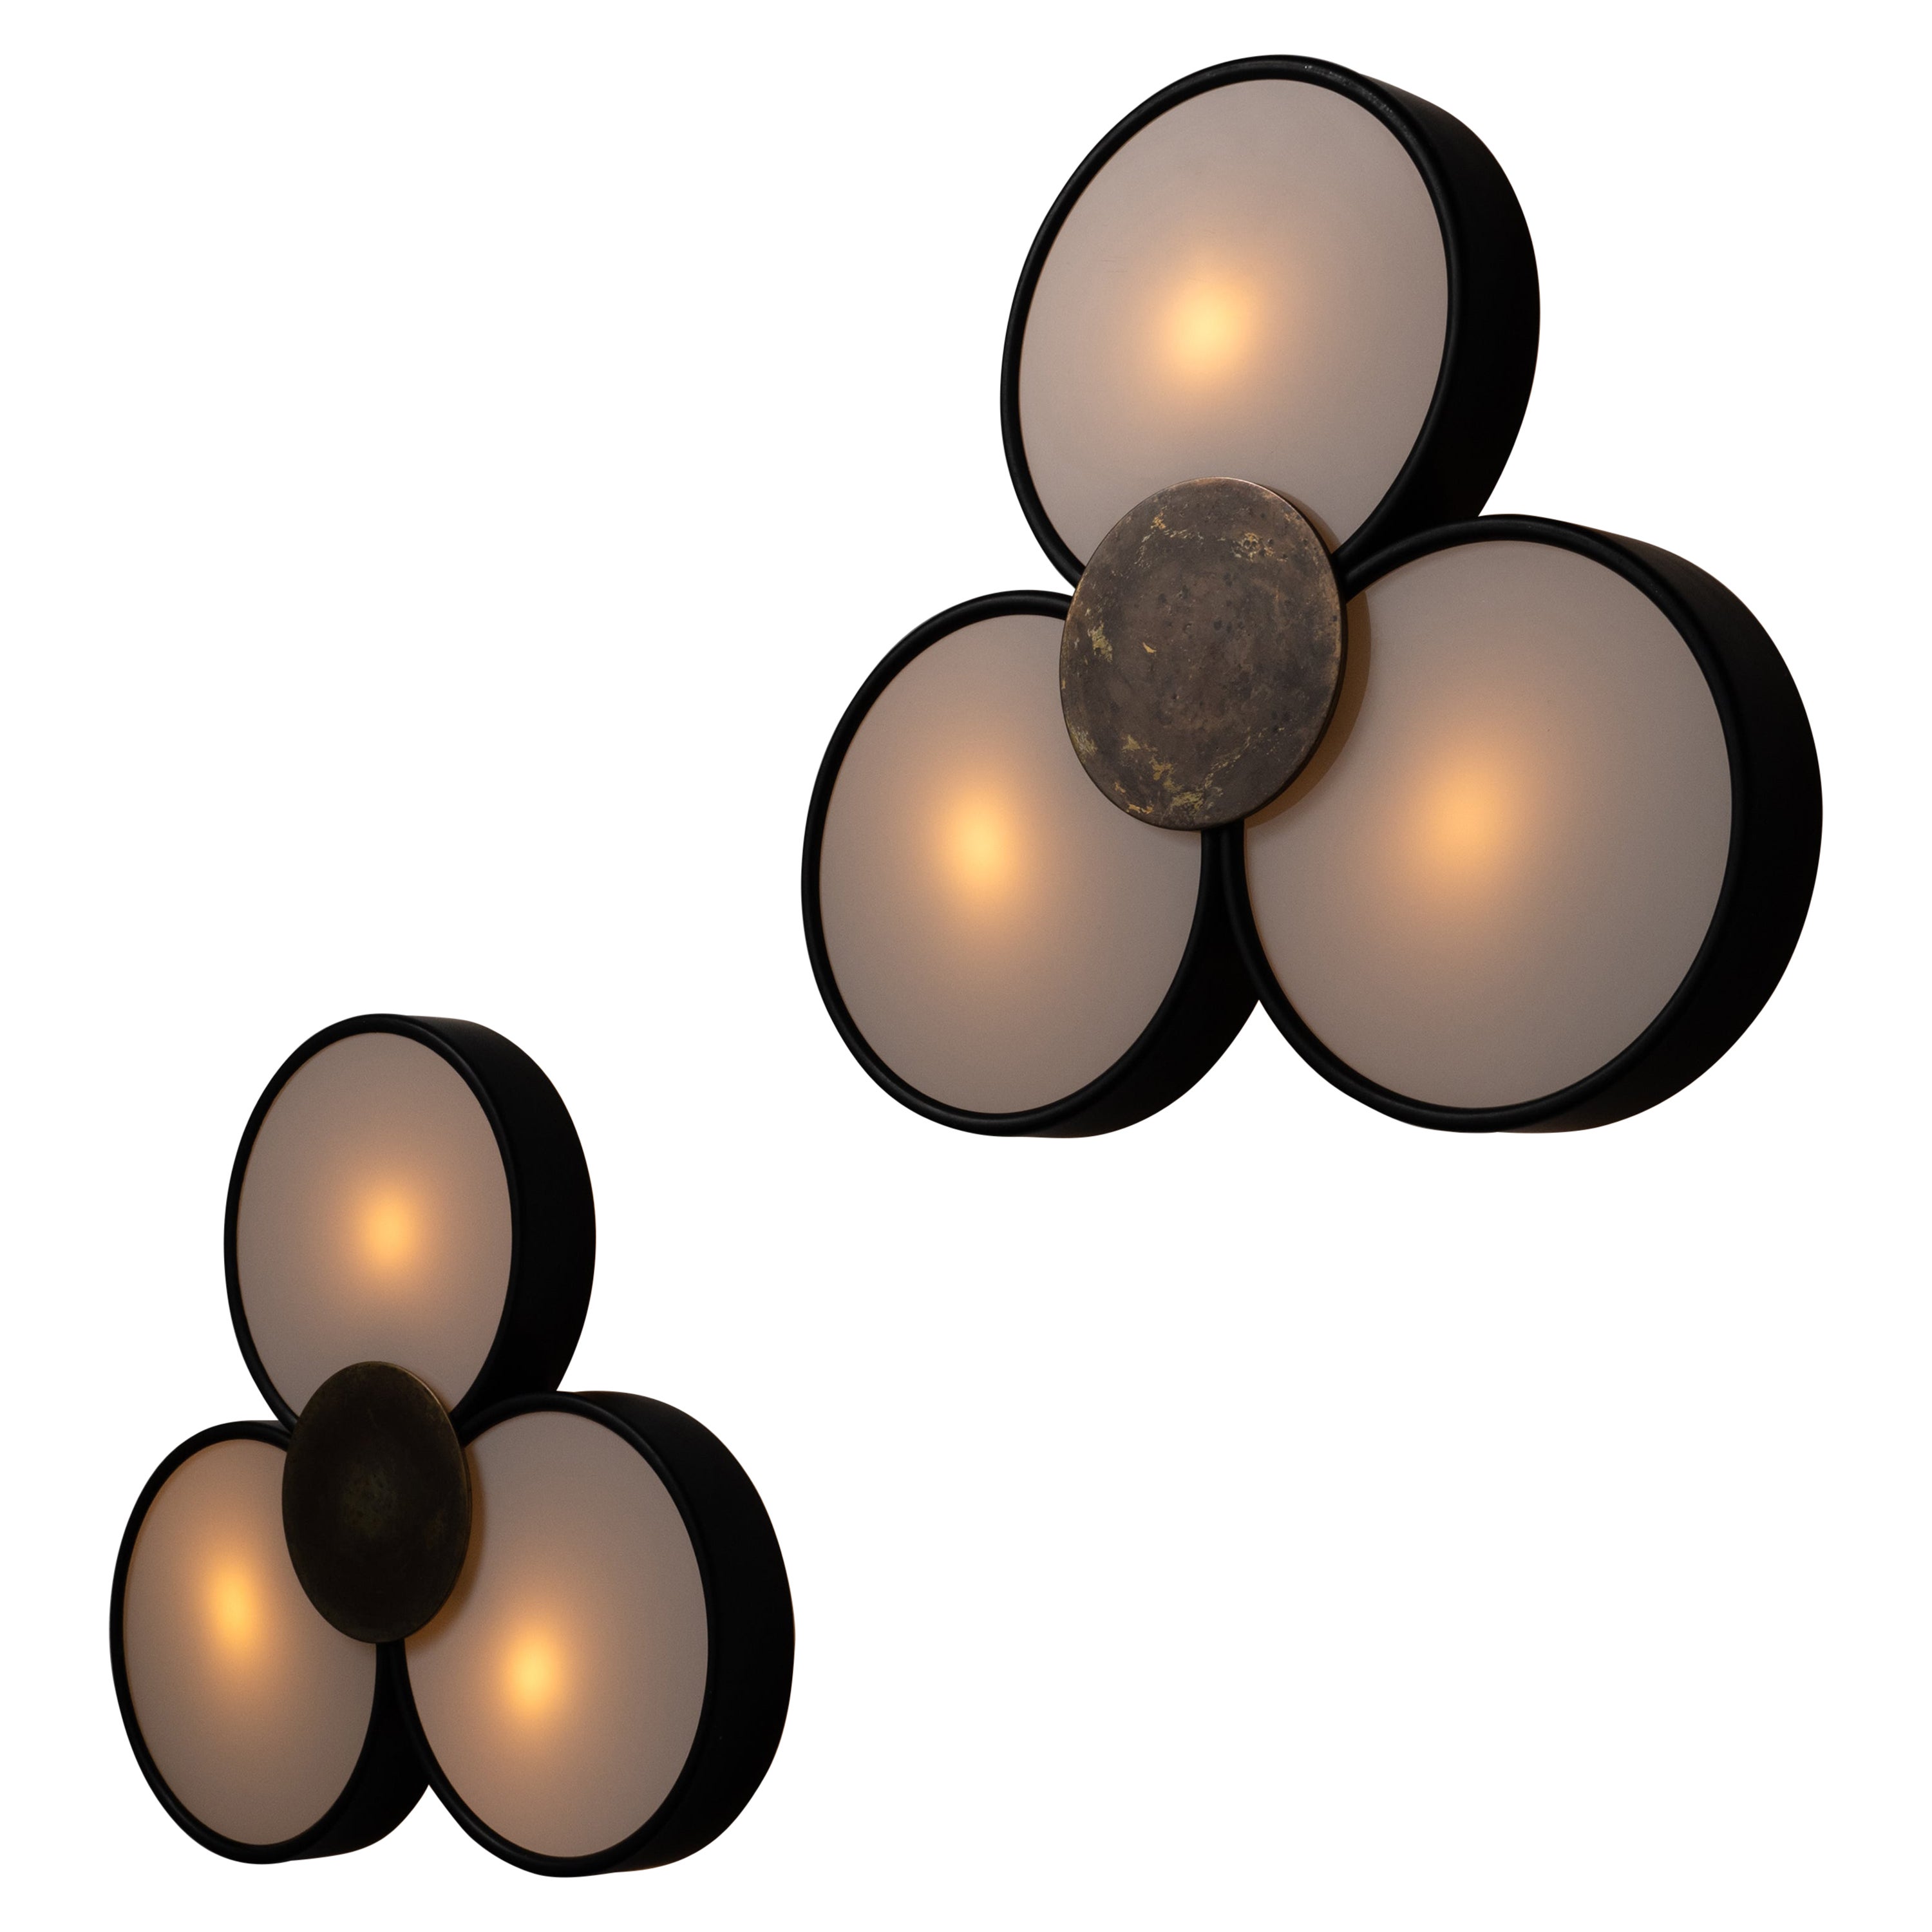 Italian flush Mount ceiling lights. Designed and manufactured in Italy, circa the 1960s. Three translucent glass petals are framed around a black rim. An aged brass button is at the center finishing the detail on these sconces. We recommend three